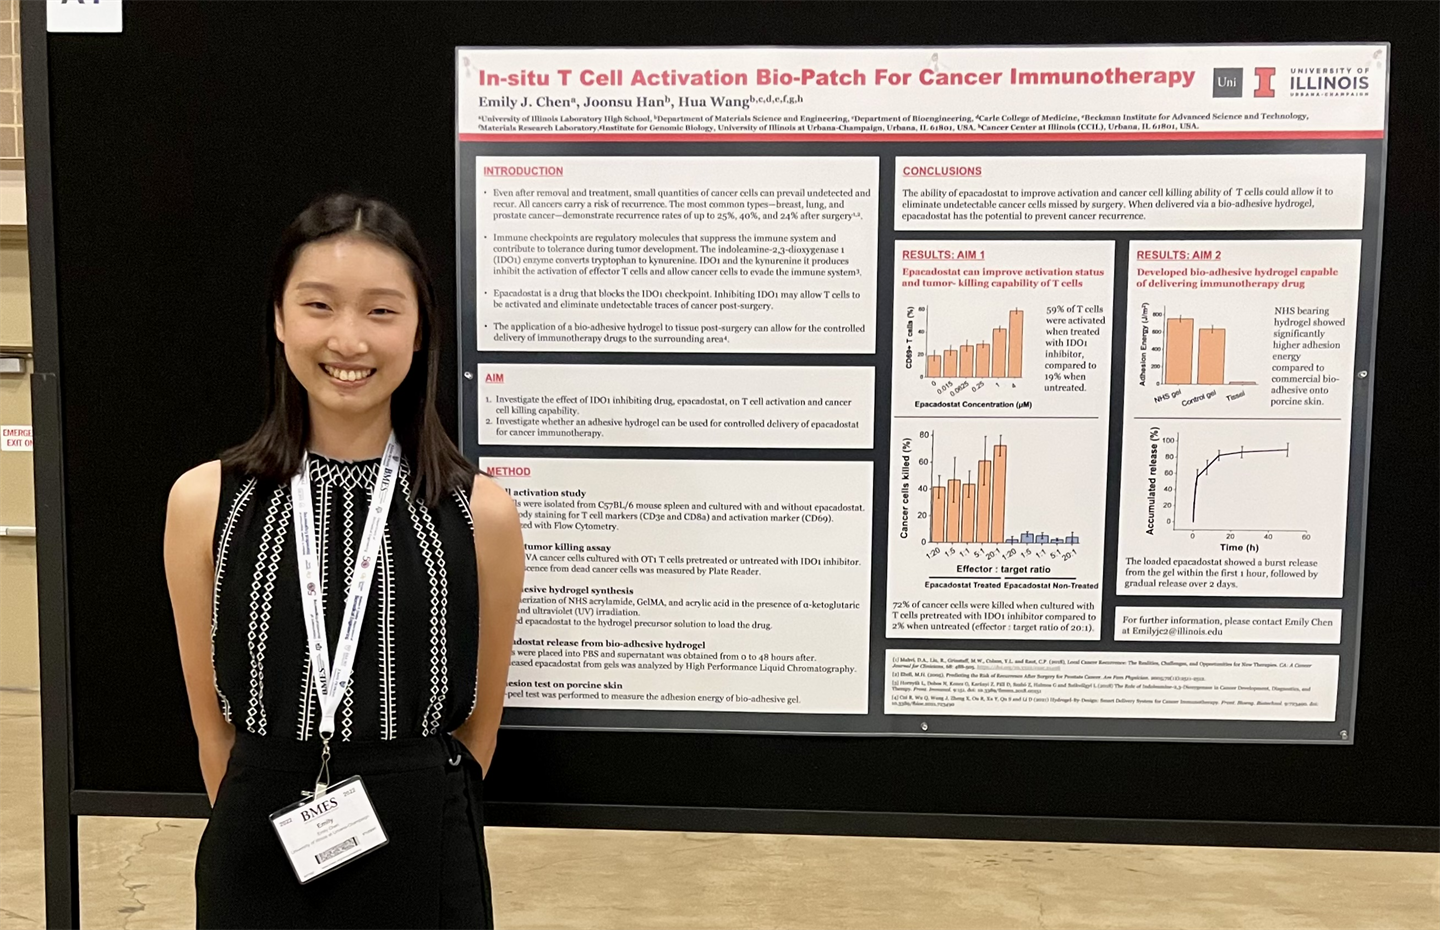 Emily Chen poses for a photo alongside her research poster on in-situ T cell activation bio-patch for cancer immunotherapy at the 2022 Biomedical Engineering Society's annual meeting held Oct. 12-15 in San Antonio, Texas.